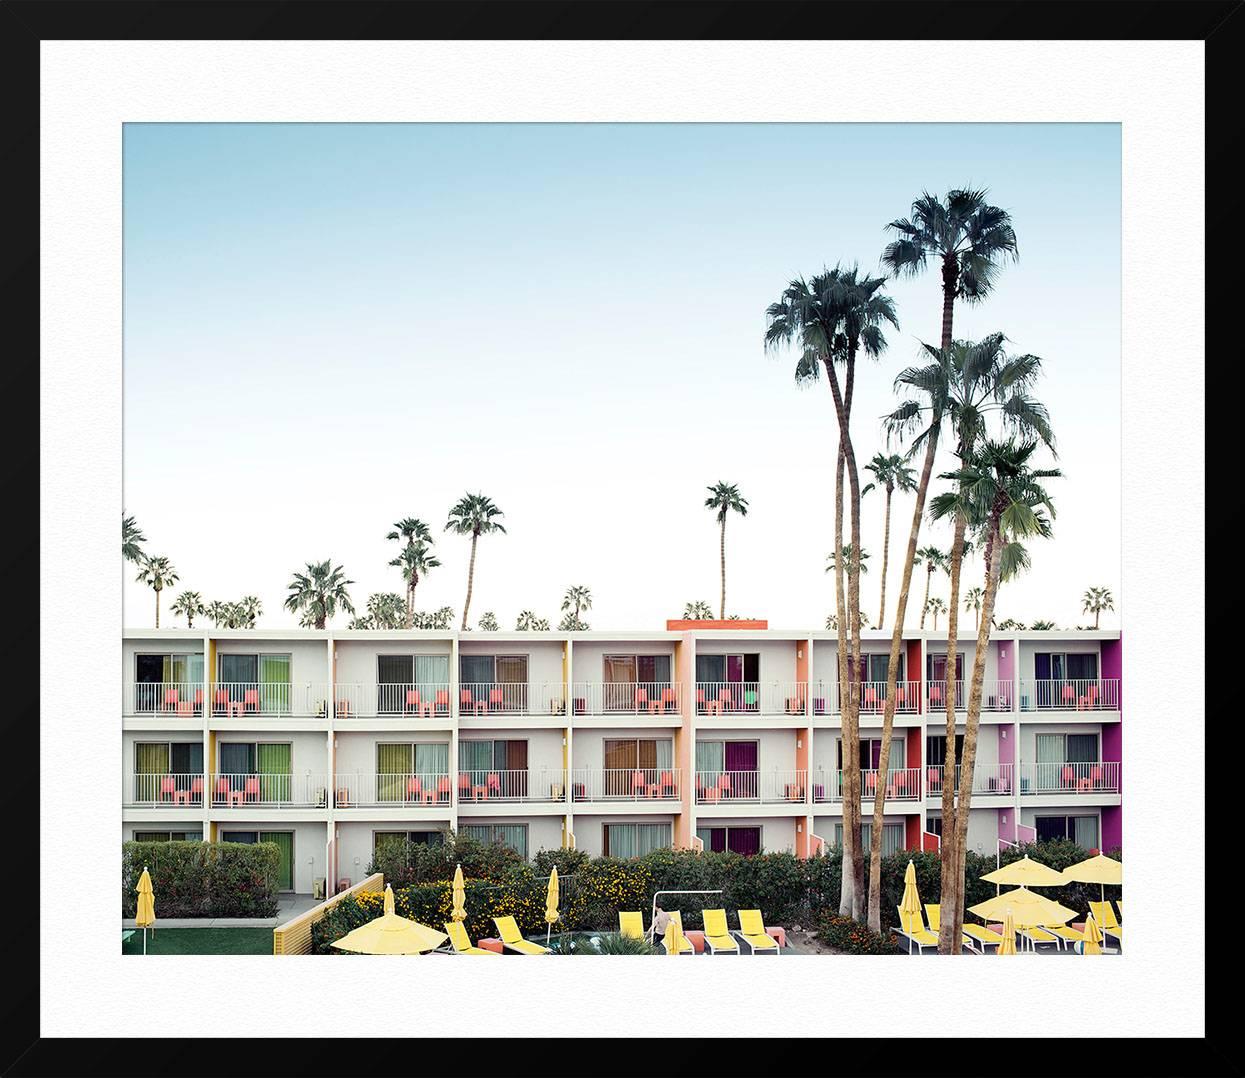 ABOUT THIS PIECE: Ludwig Favre photographed California's most iconic mid-century architecture. The Saguaro Hotel in Palm Springs is a perfect example of California's mid-century movement. Ludwig captures the architecture with the same interesting